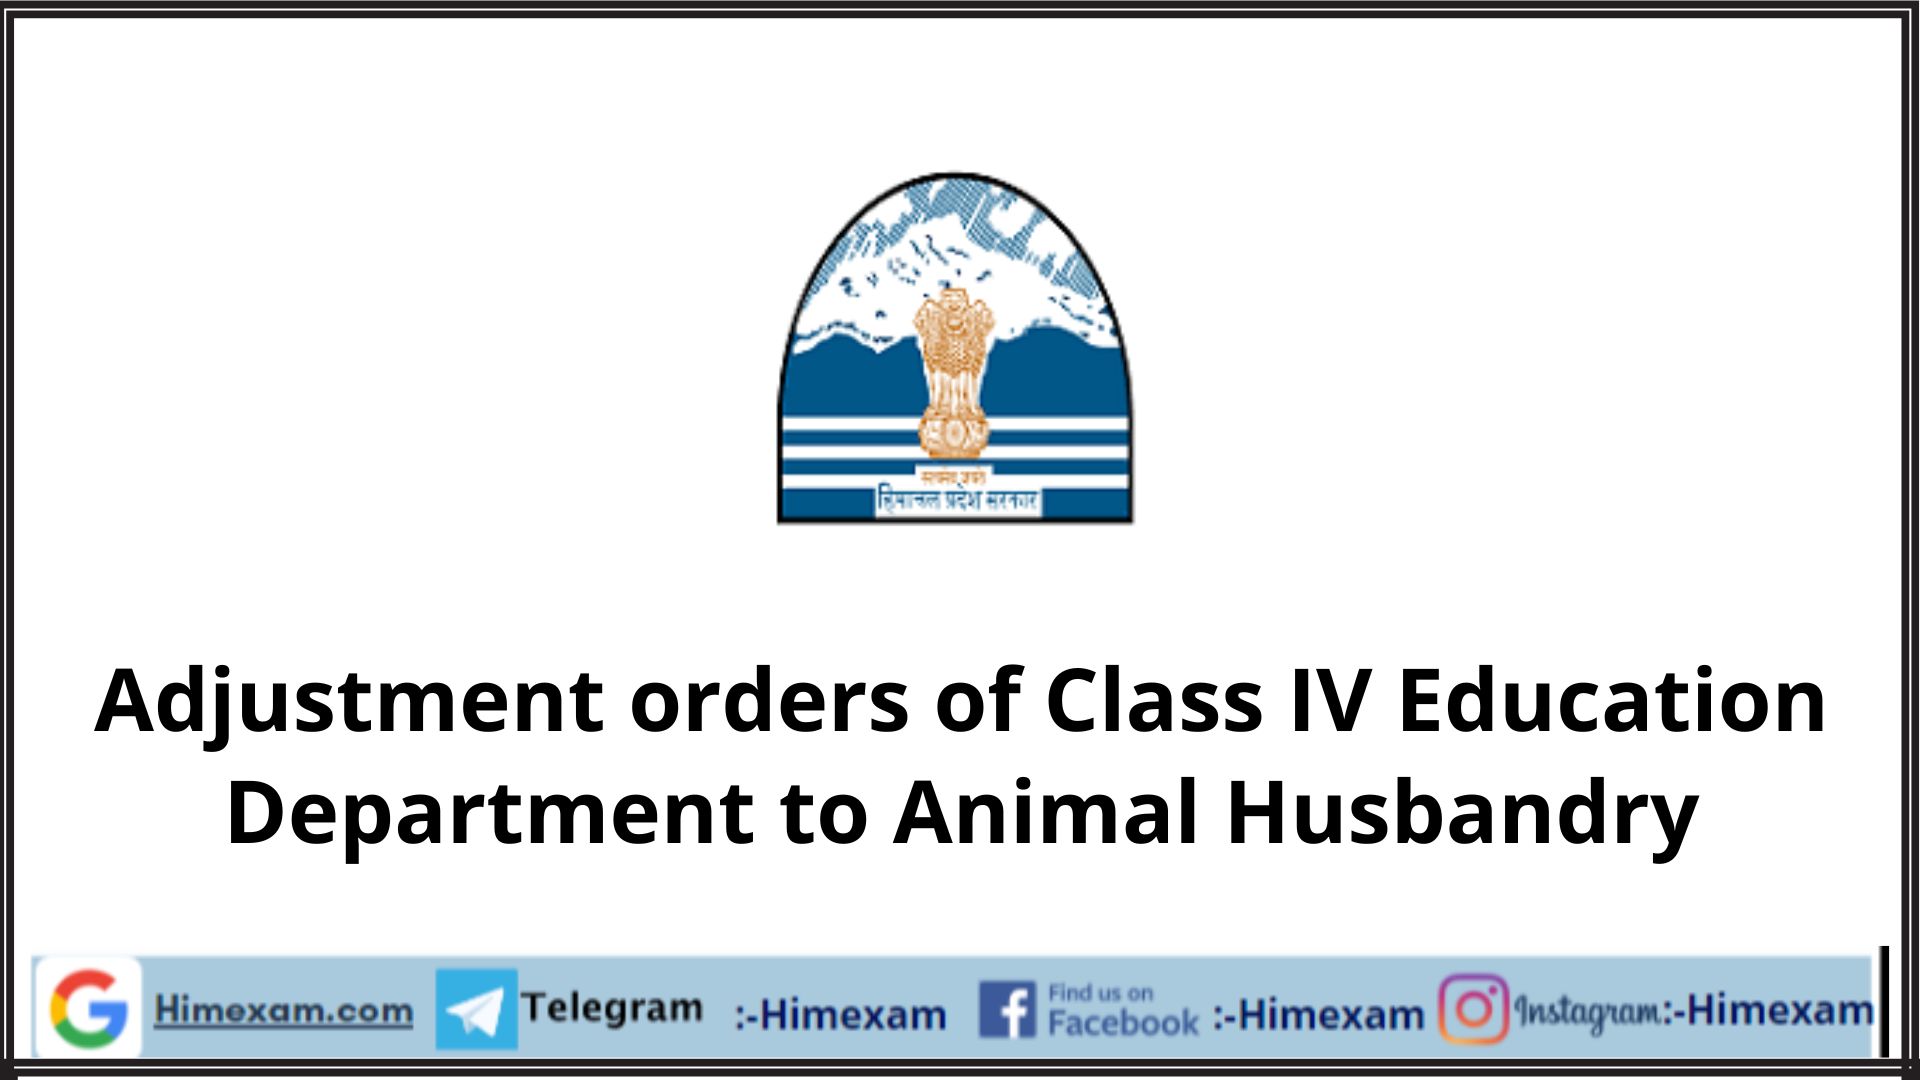 Adjustment orders of Class IV Education Department to Animal Husbandry